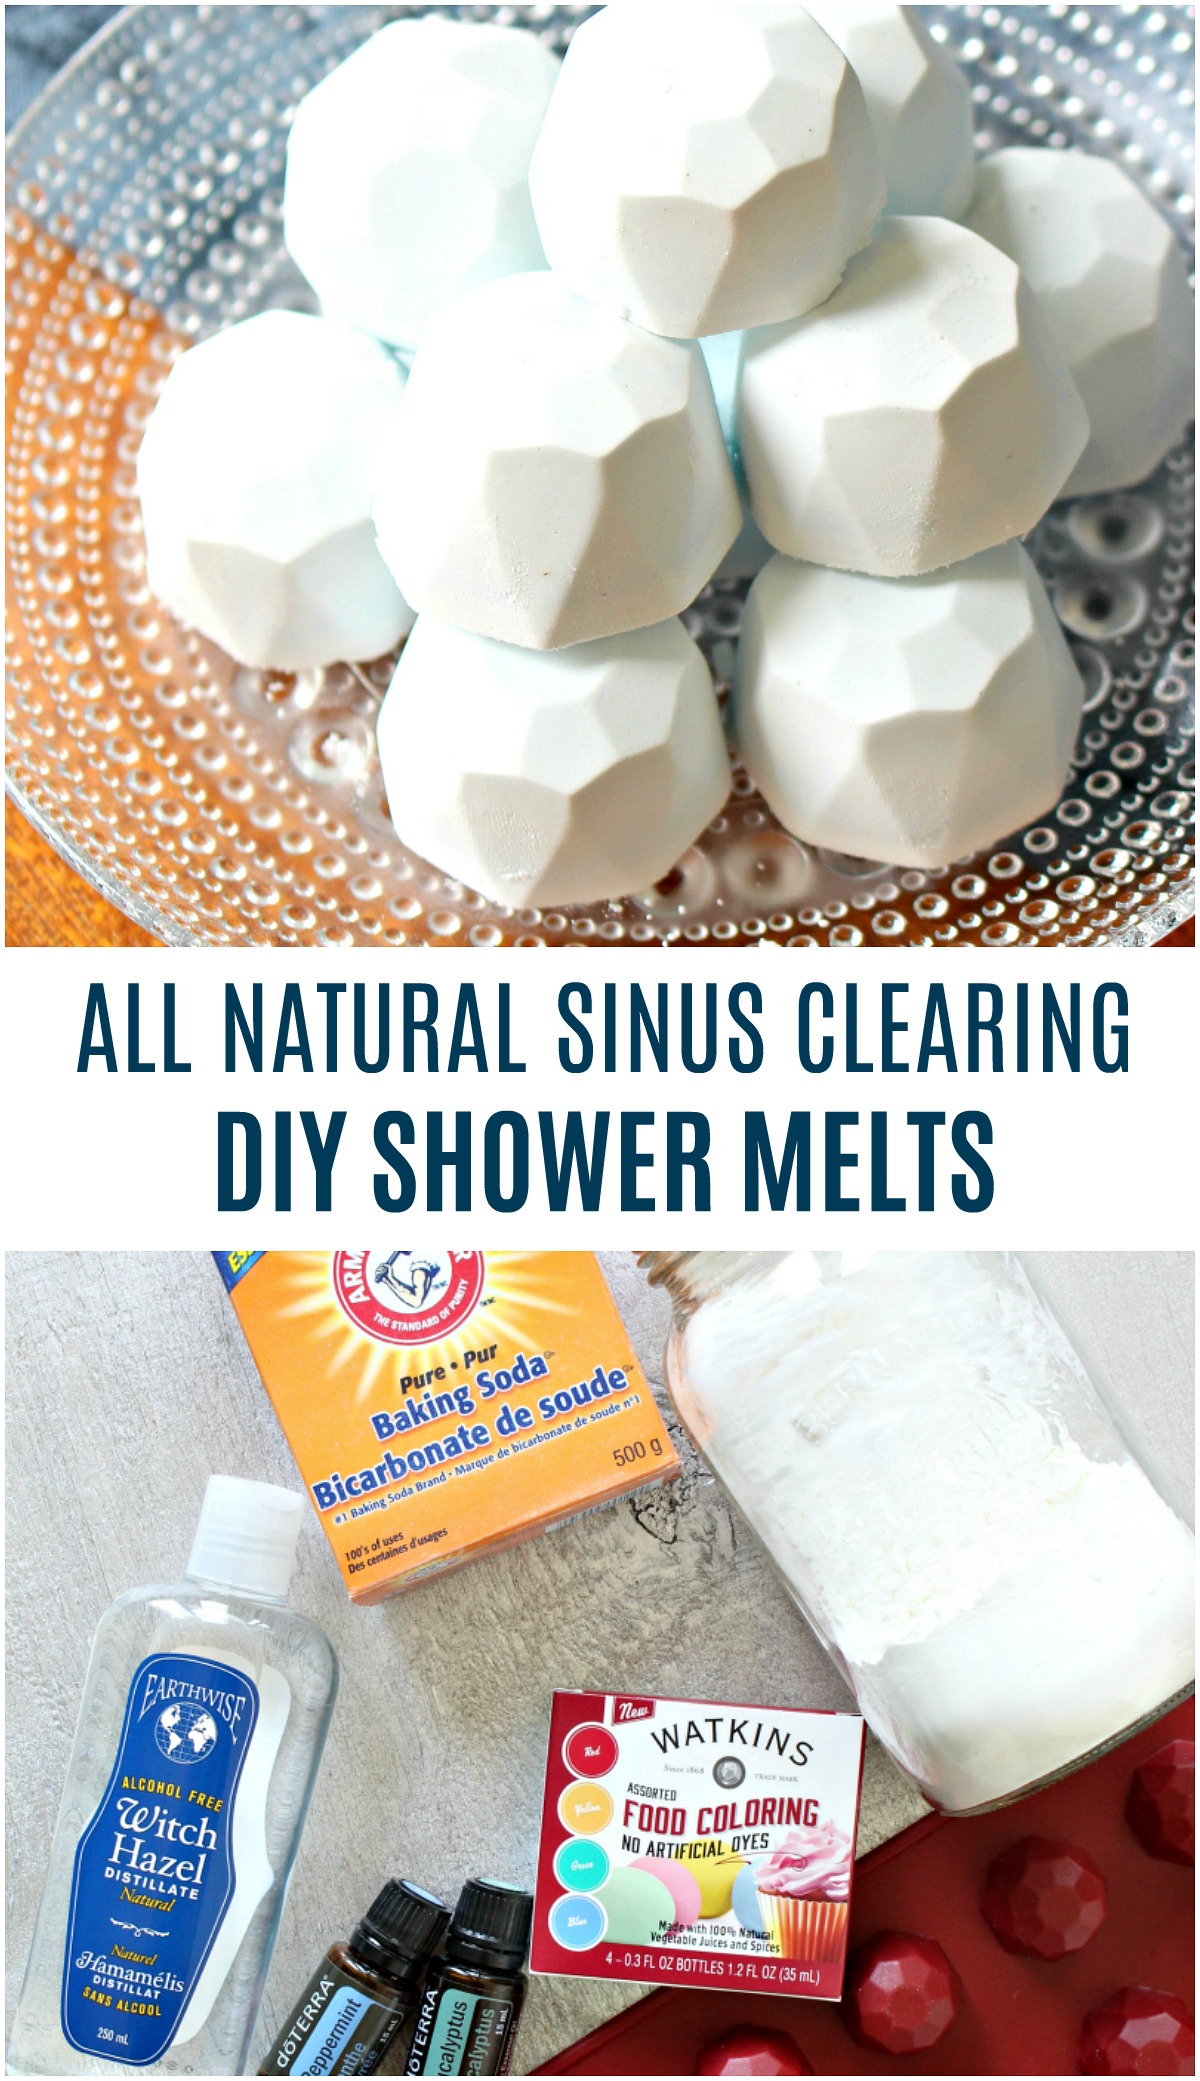 All Natural Sinus Clearing Shower Melts